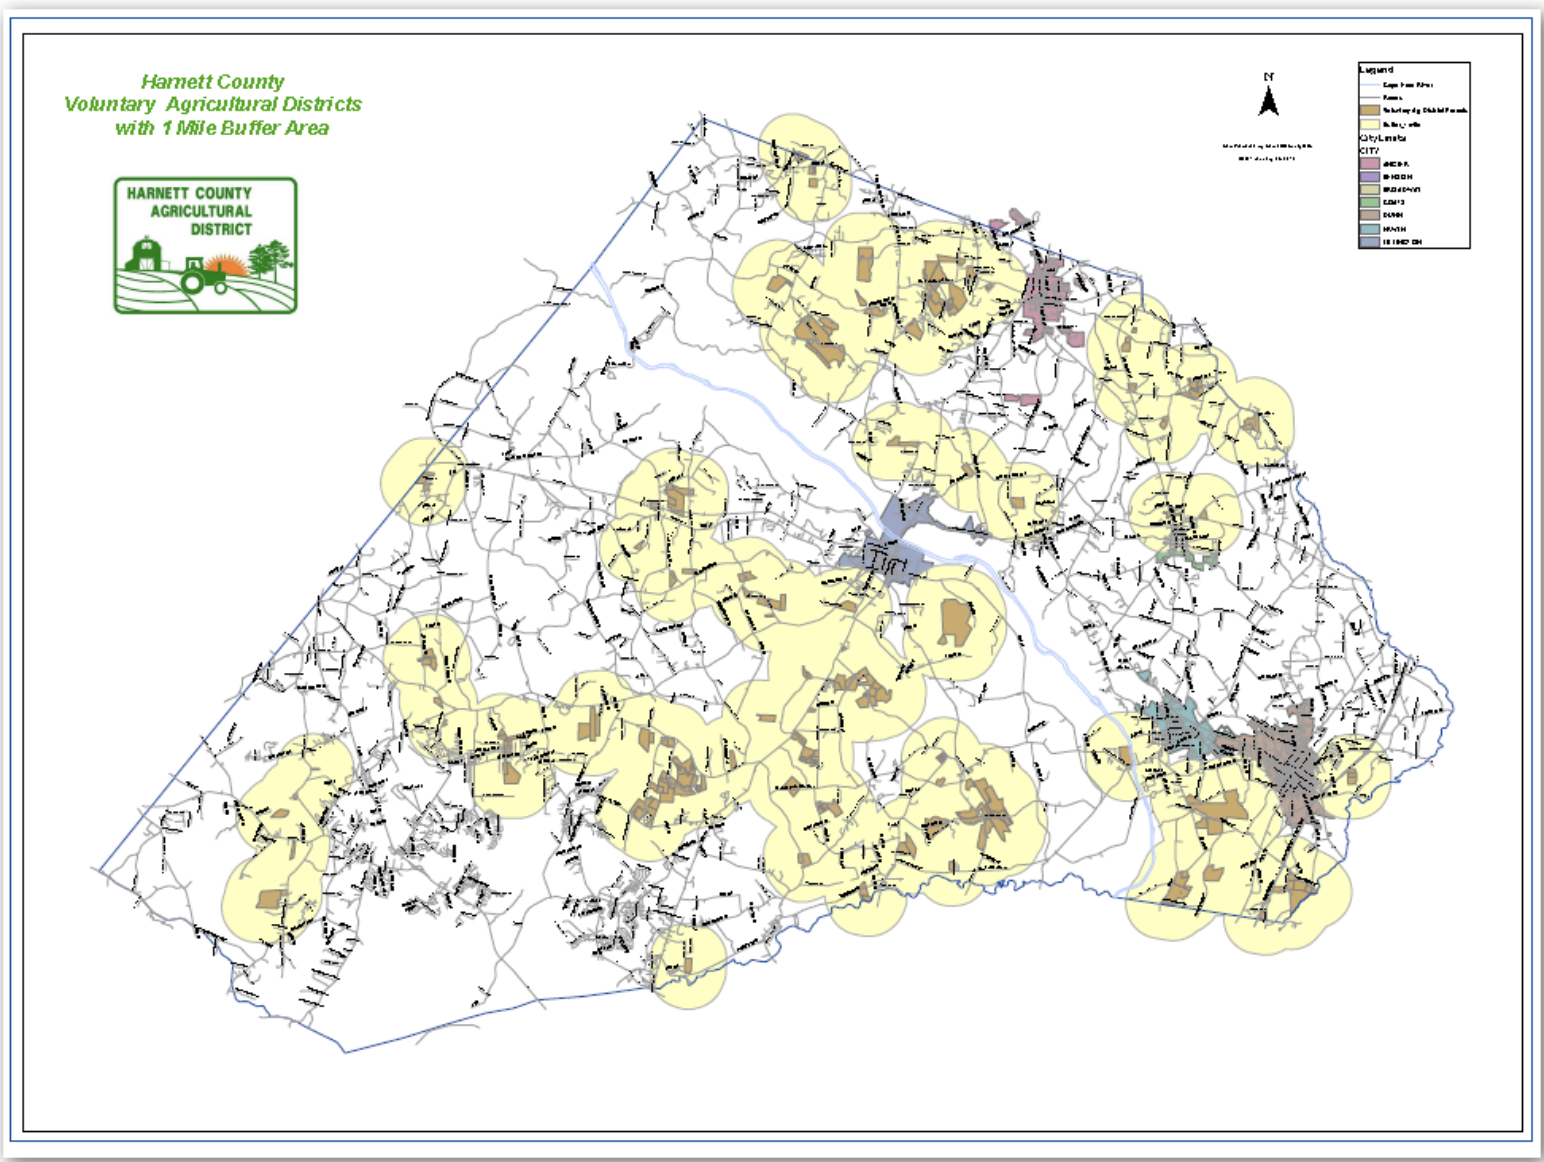 Land Use Law | NC State Extension